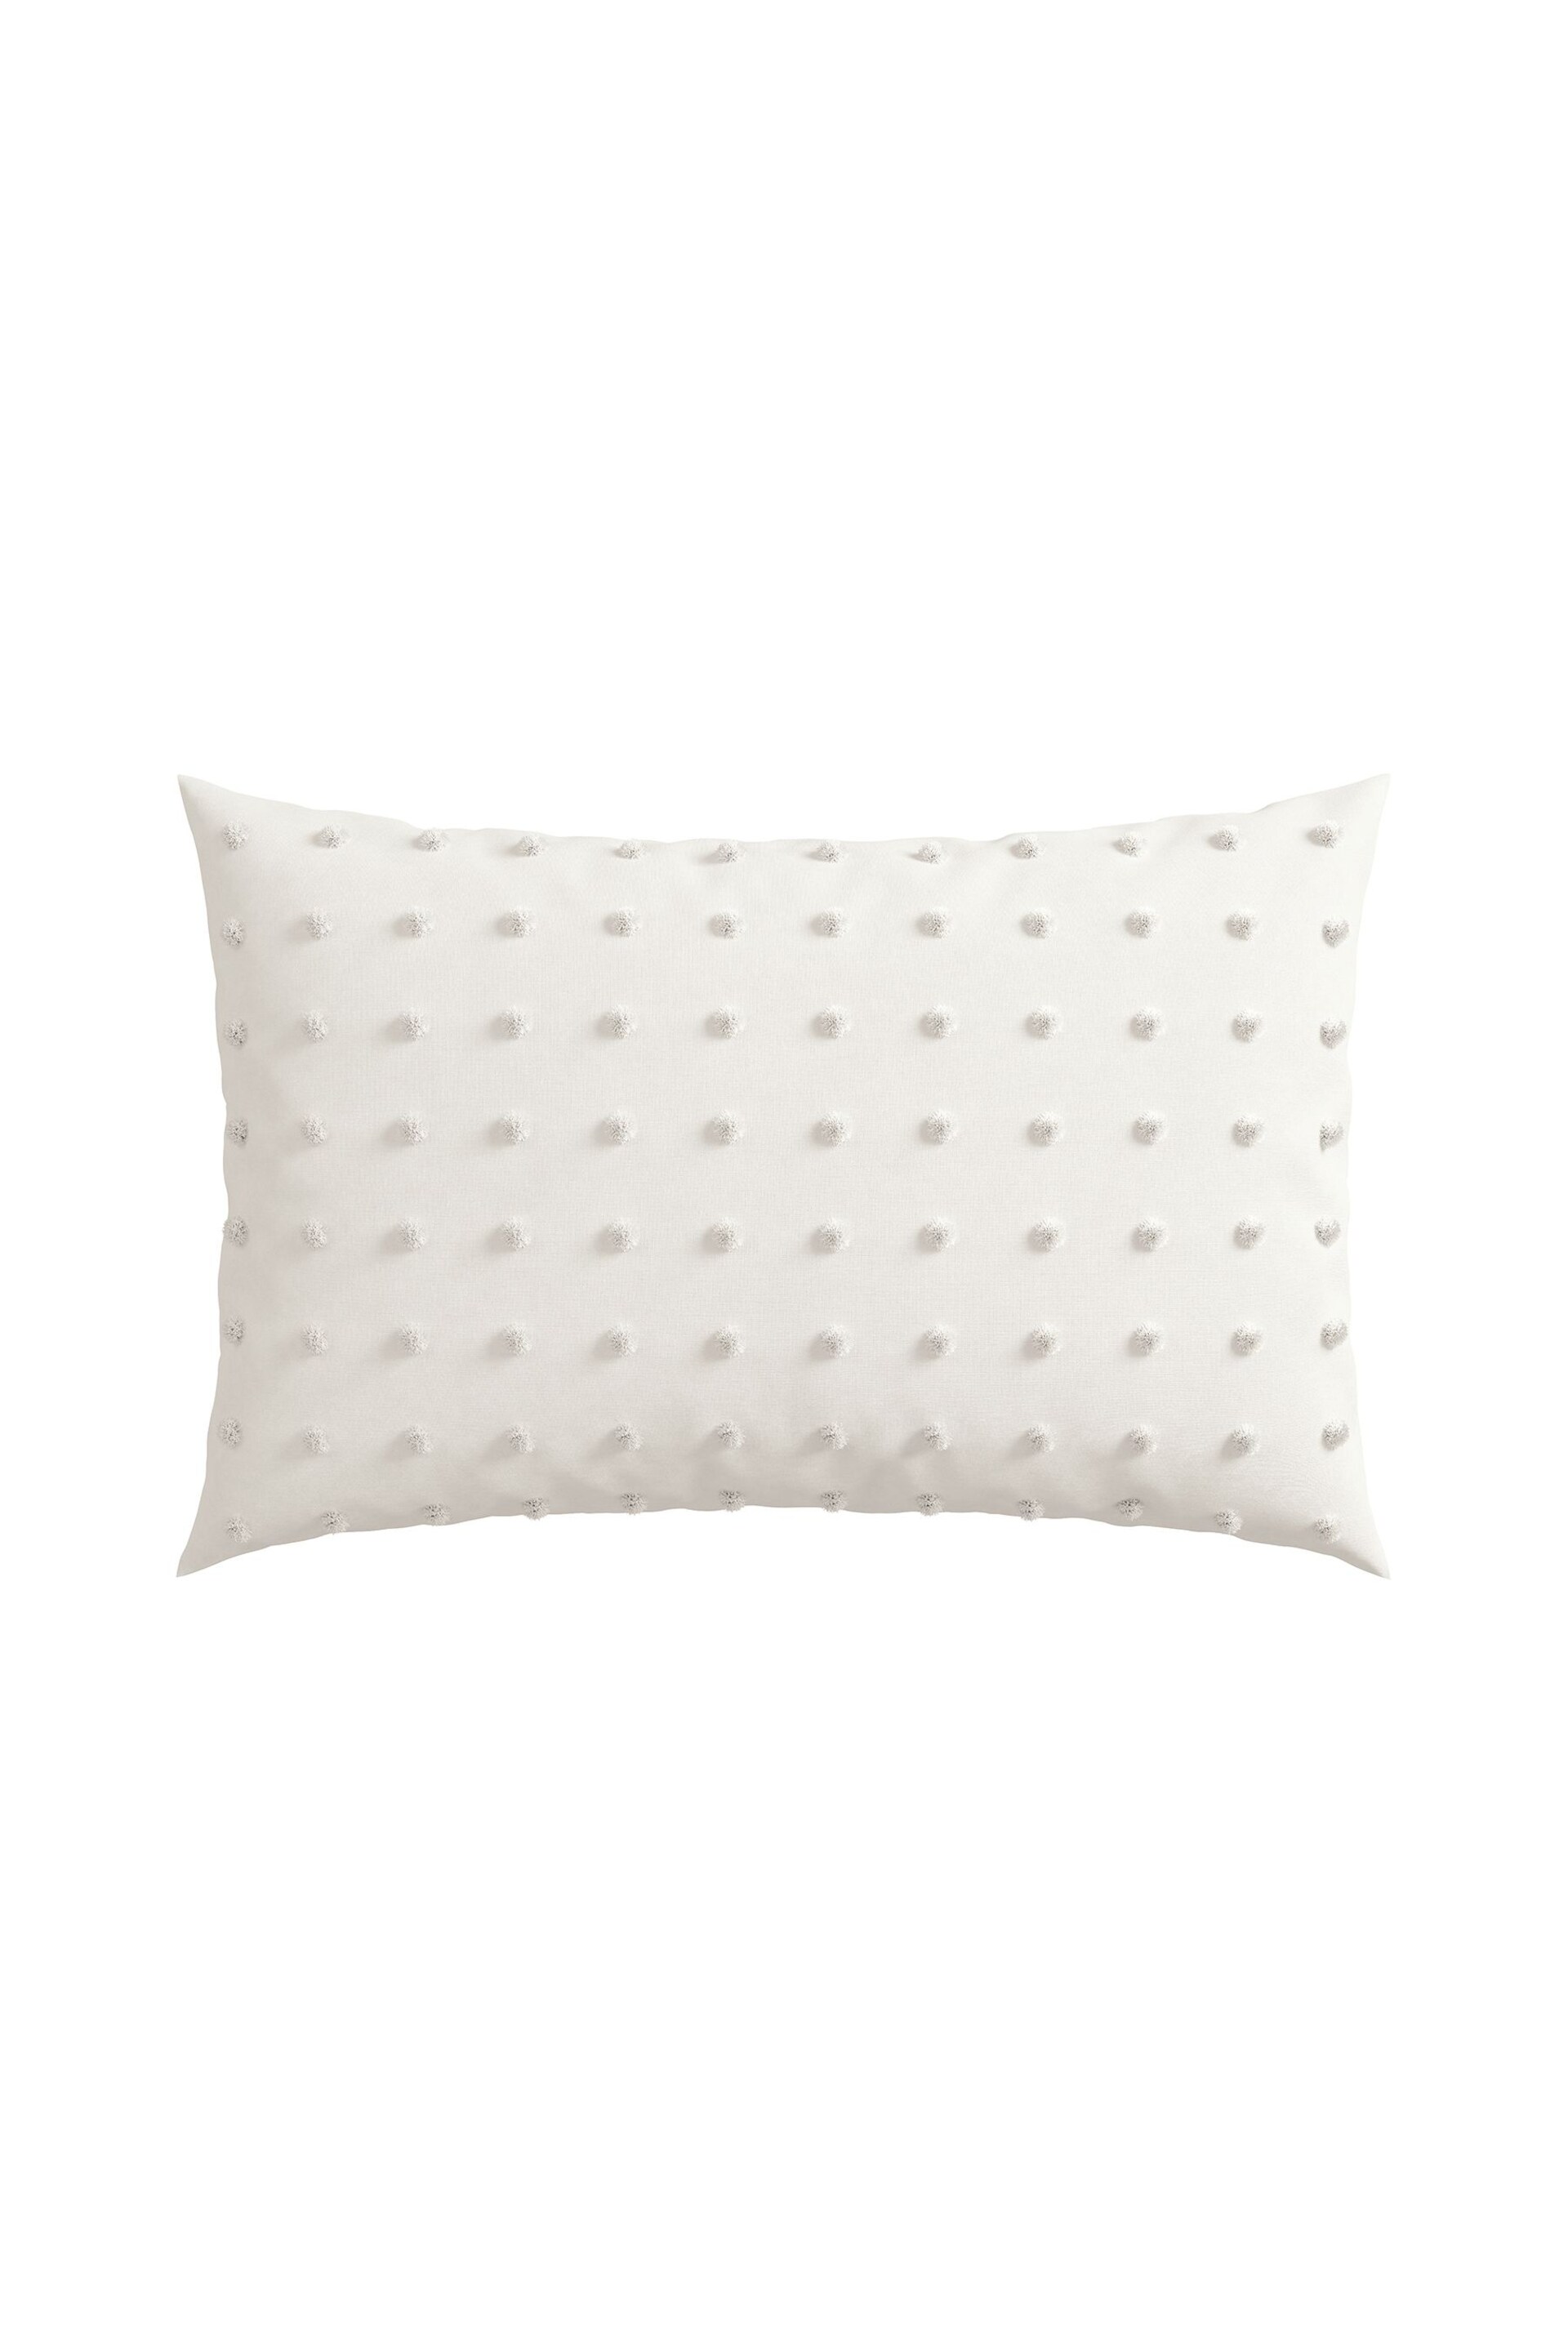 Helena Springfield White Tufted Spot Duvet Cover and Pillowcase Set - Image 4 of 4